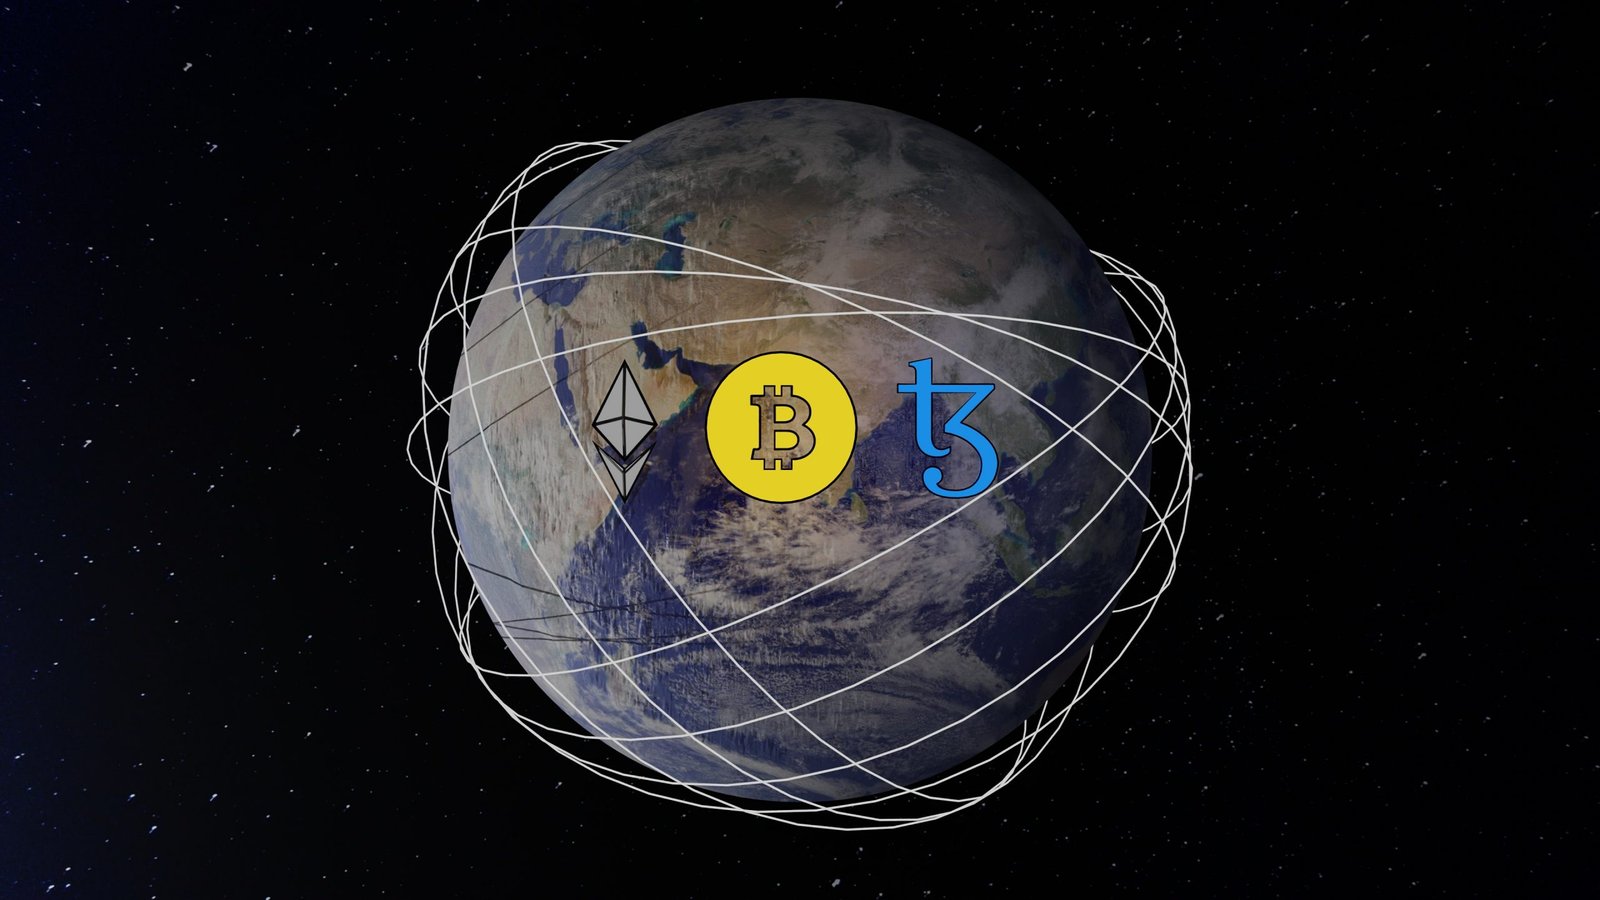 Planet Earth seen from space with lines around it suggesting movement and a range of cryptocurrency logos.